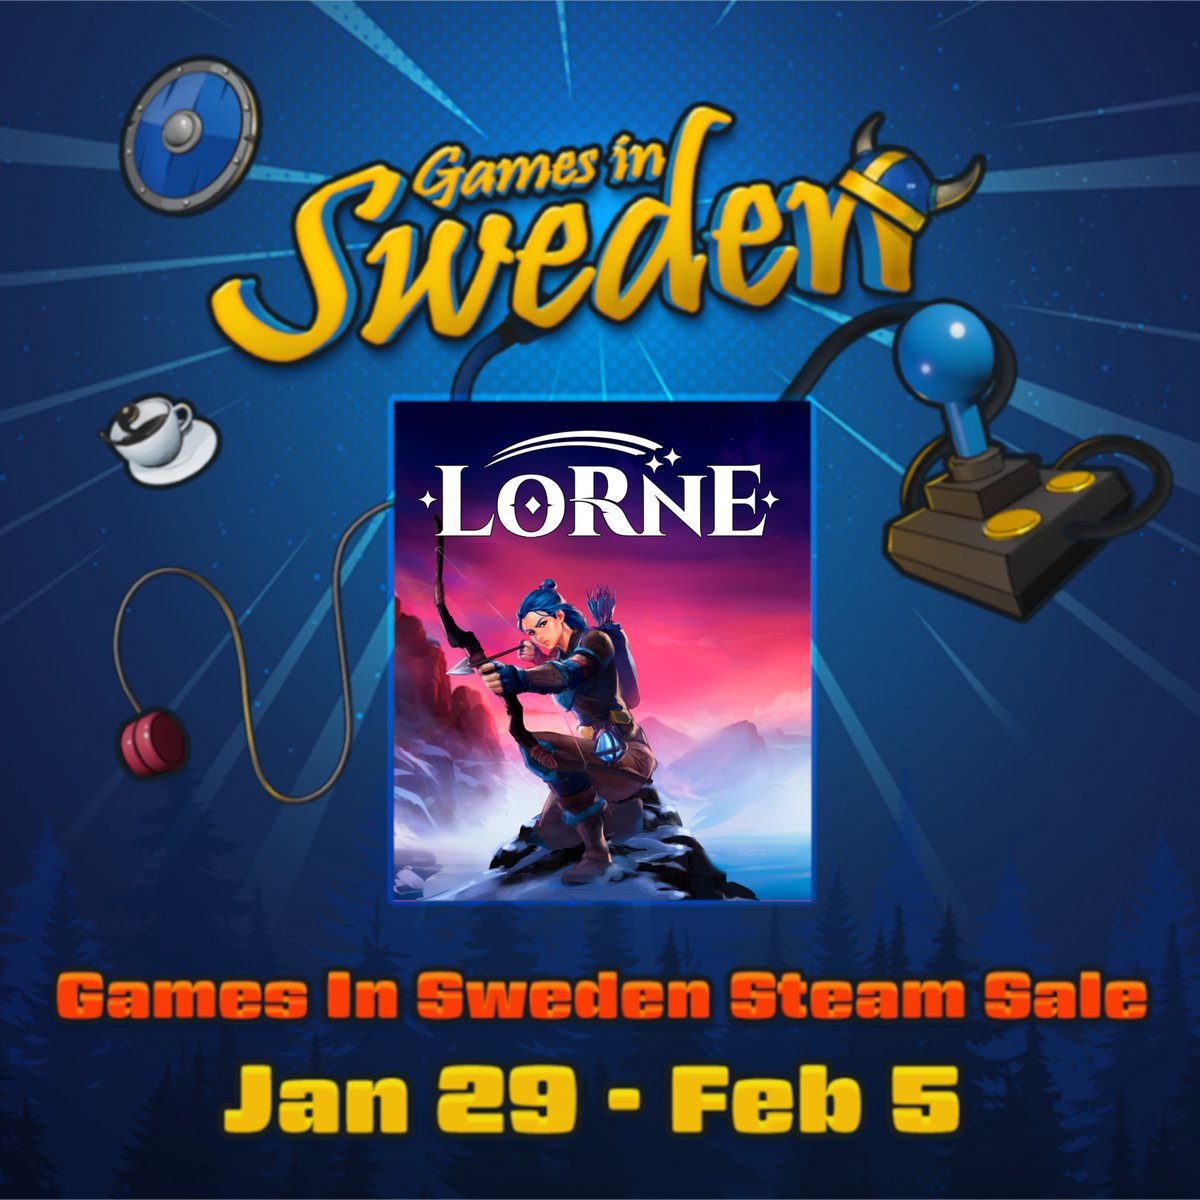 Super excited to share with everyone that Lorne's been accepted to partake in Games in Sweden that'll start of next week! Follow on kickstarter:tinyurl.com/d8ak7rr3/ #GamesInSweden